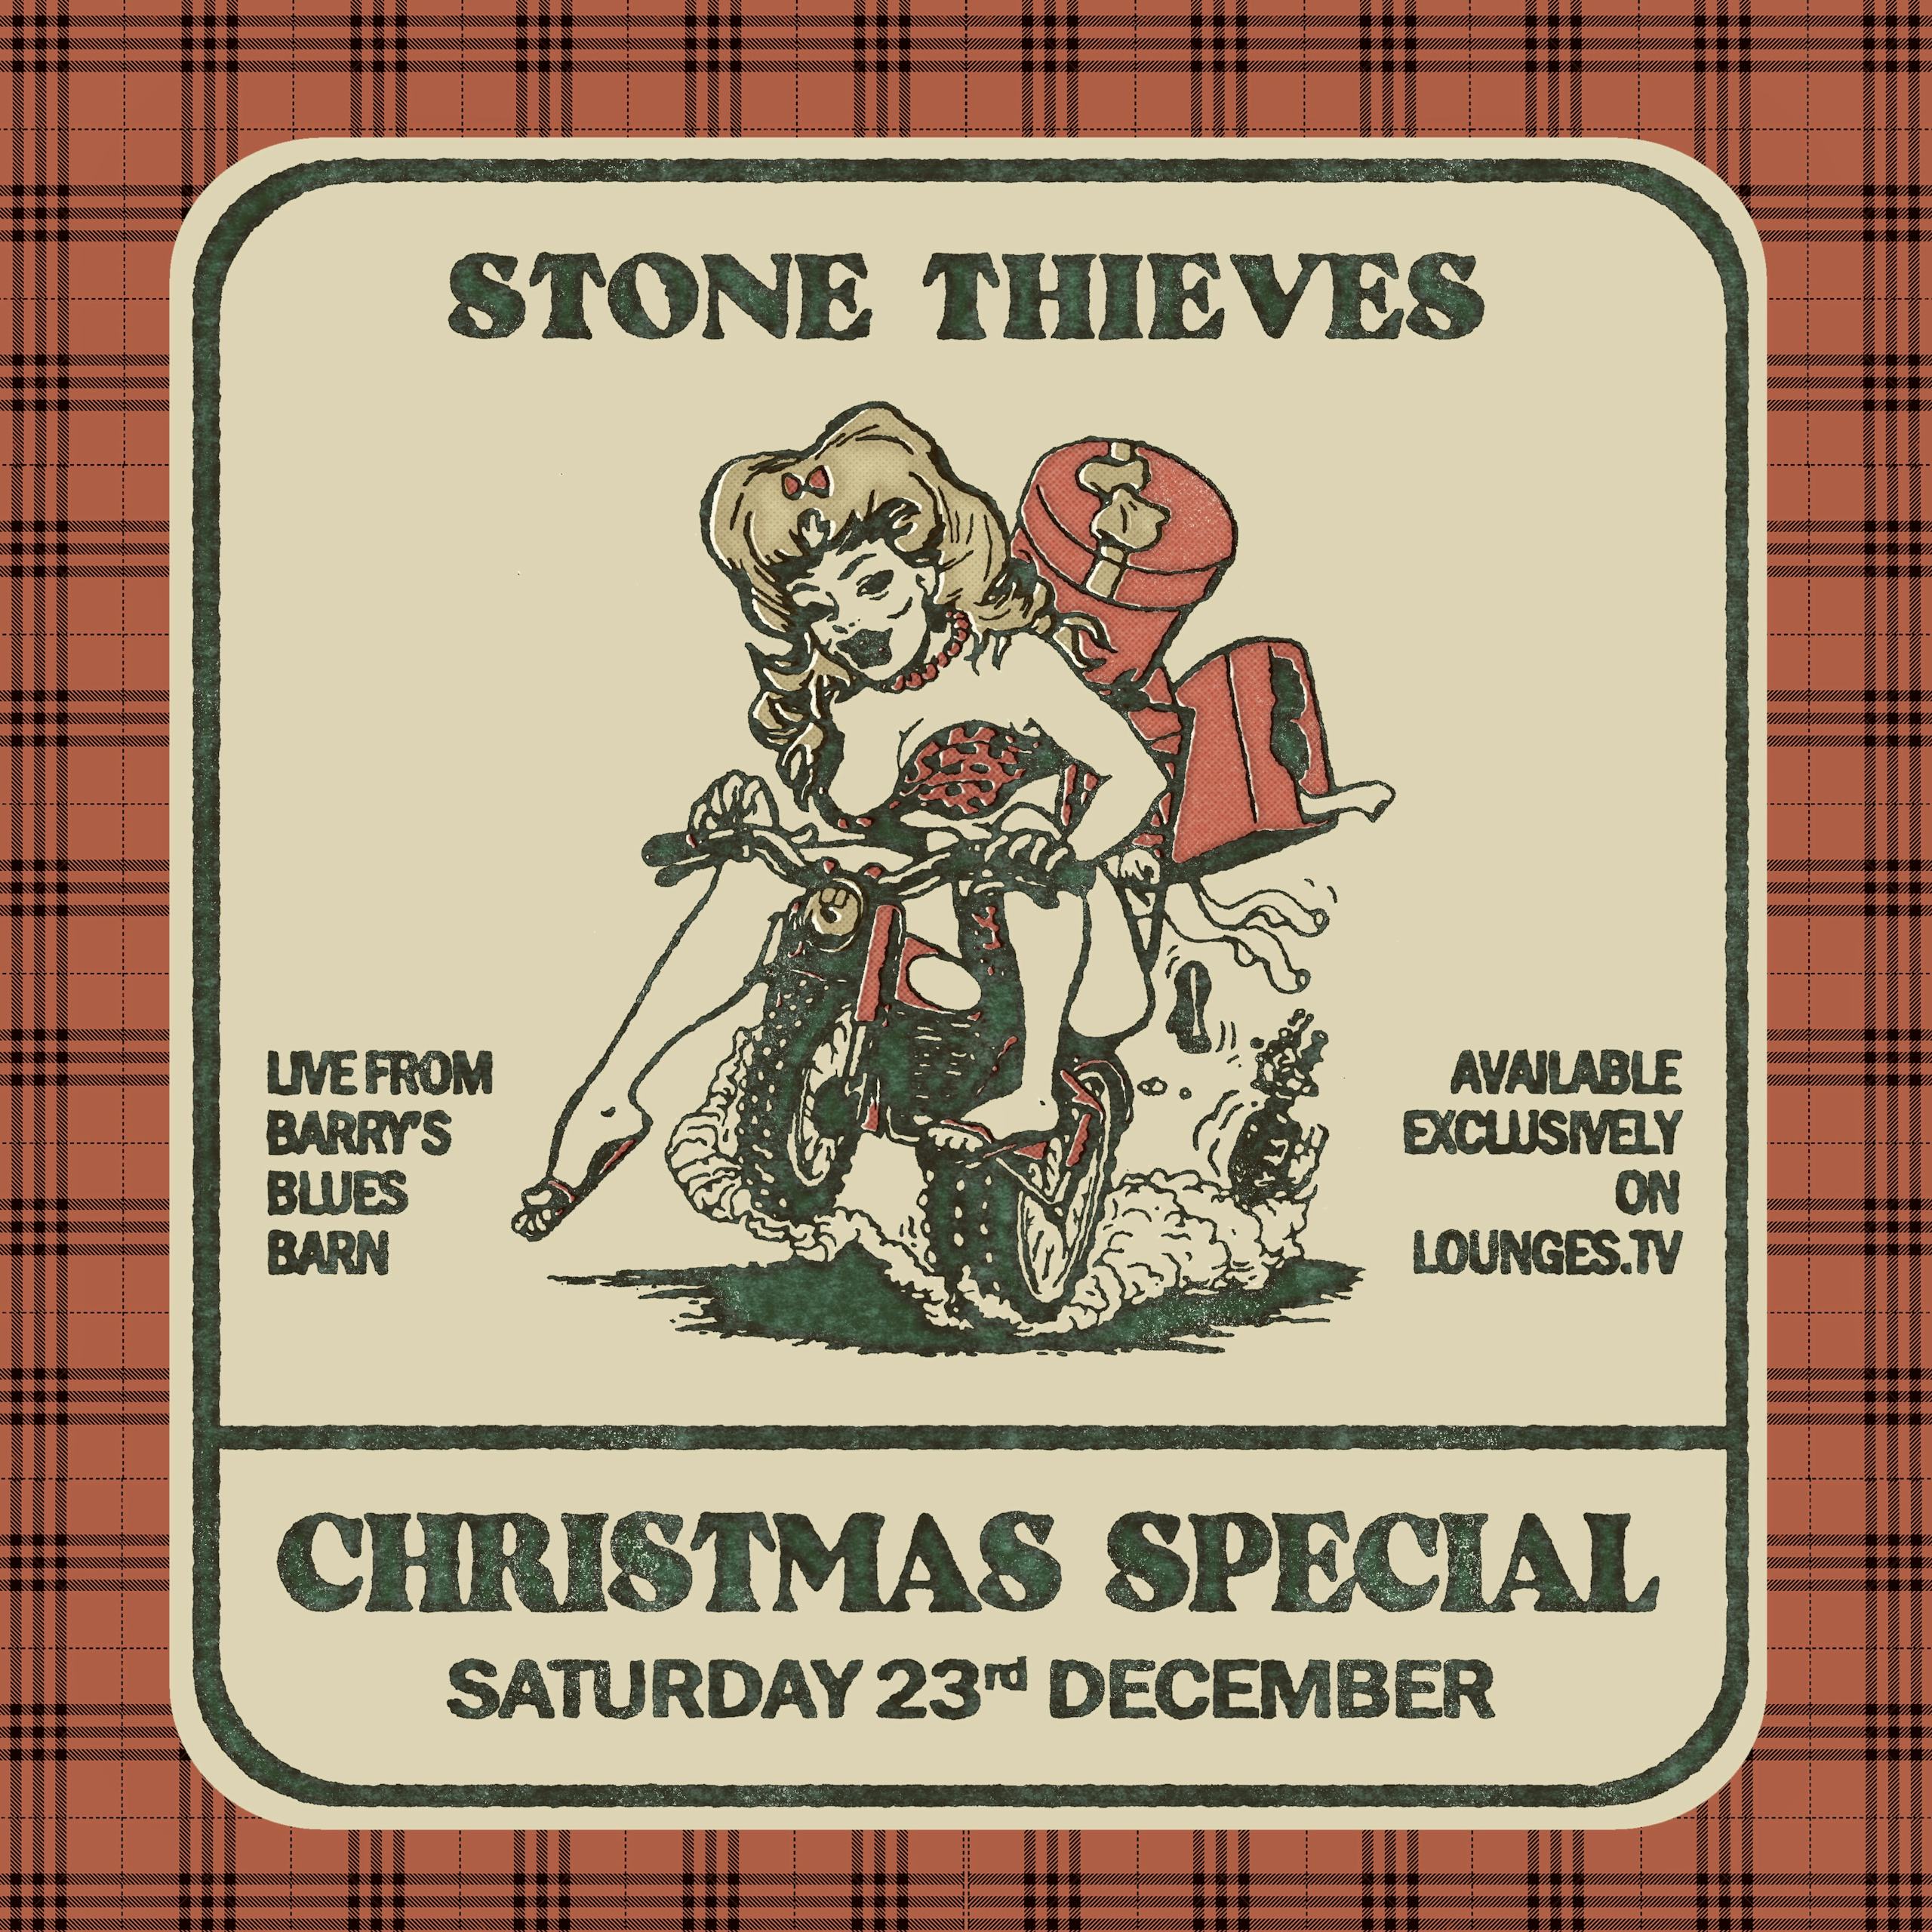 Christmas Special - Stone Thieves, live from Barry's Blues Barn